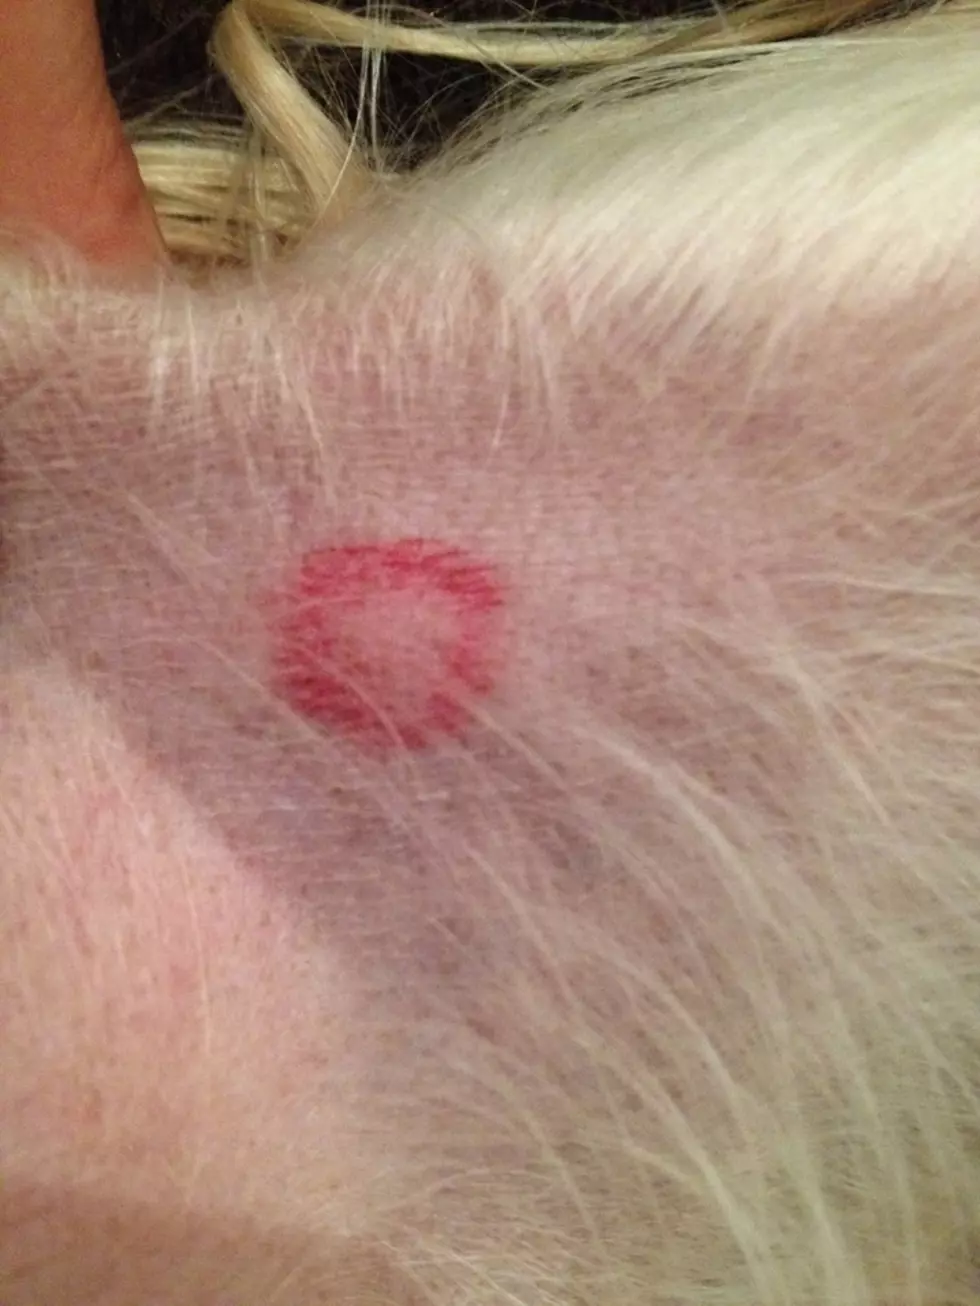 WI Veterinarian Says Not to Panic If Your Pet Has Marks Like This